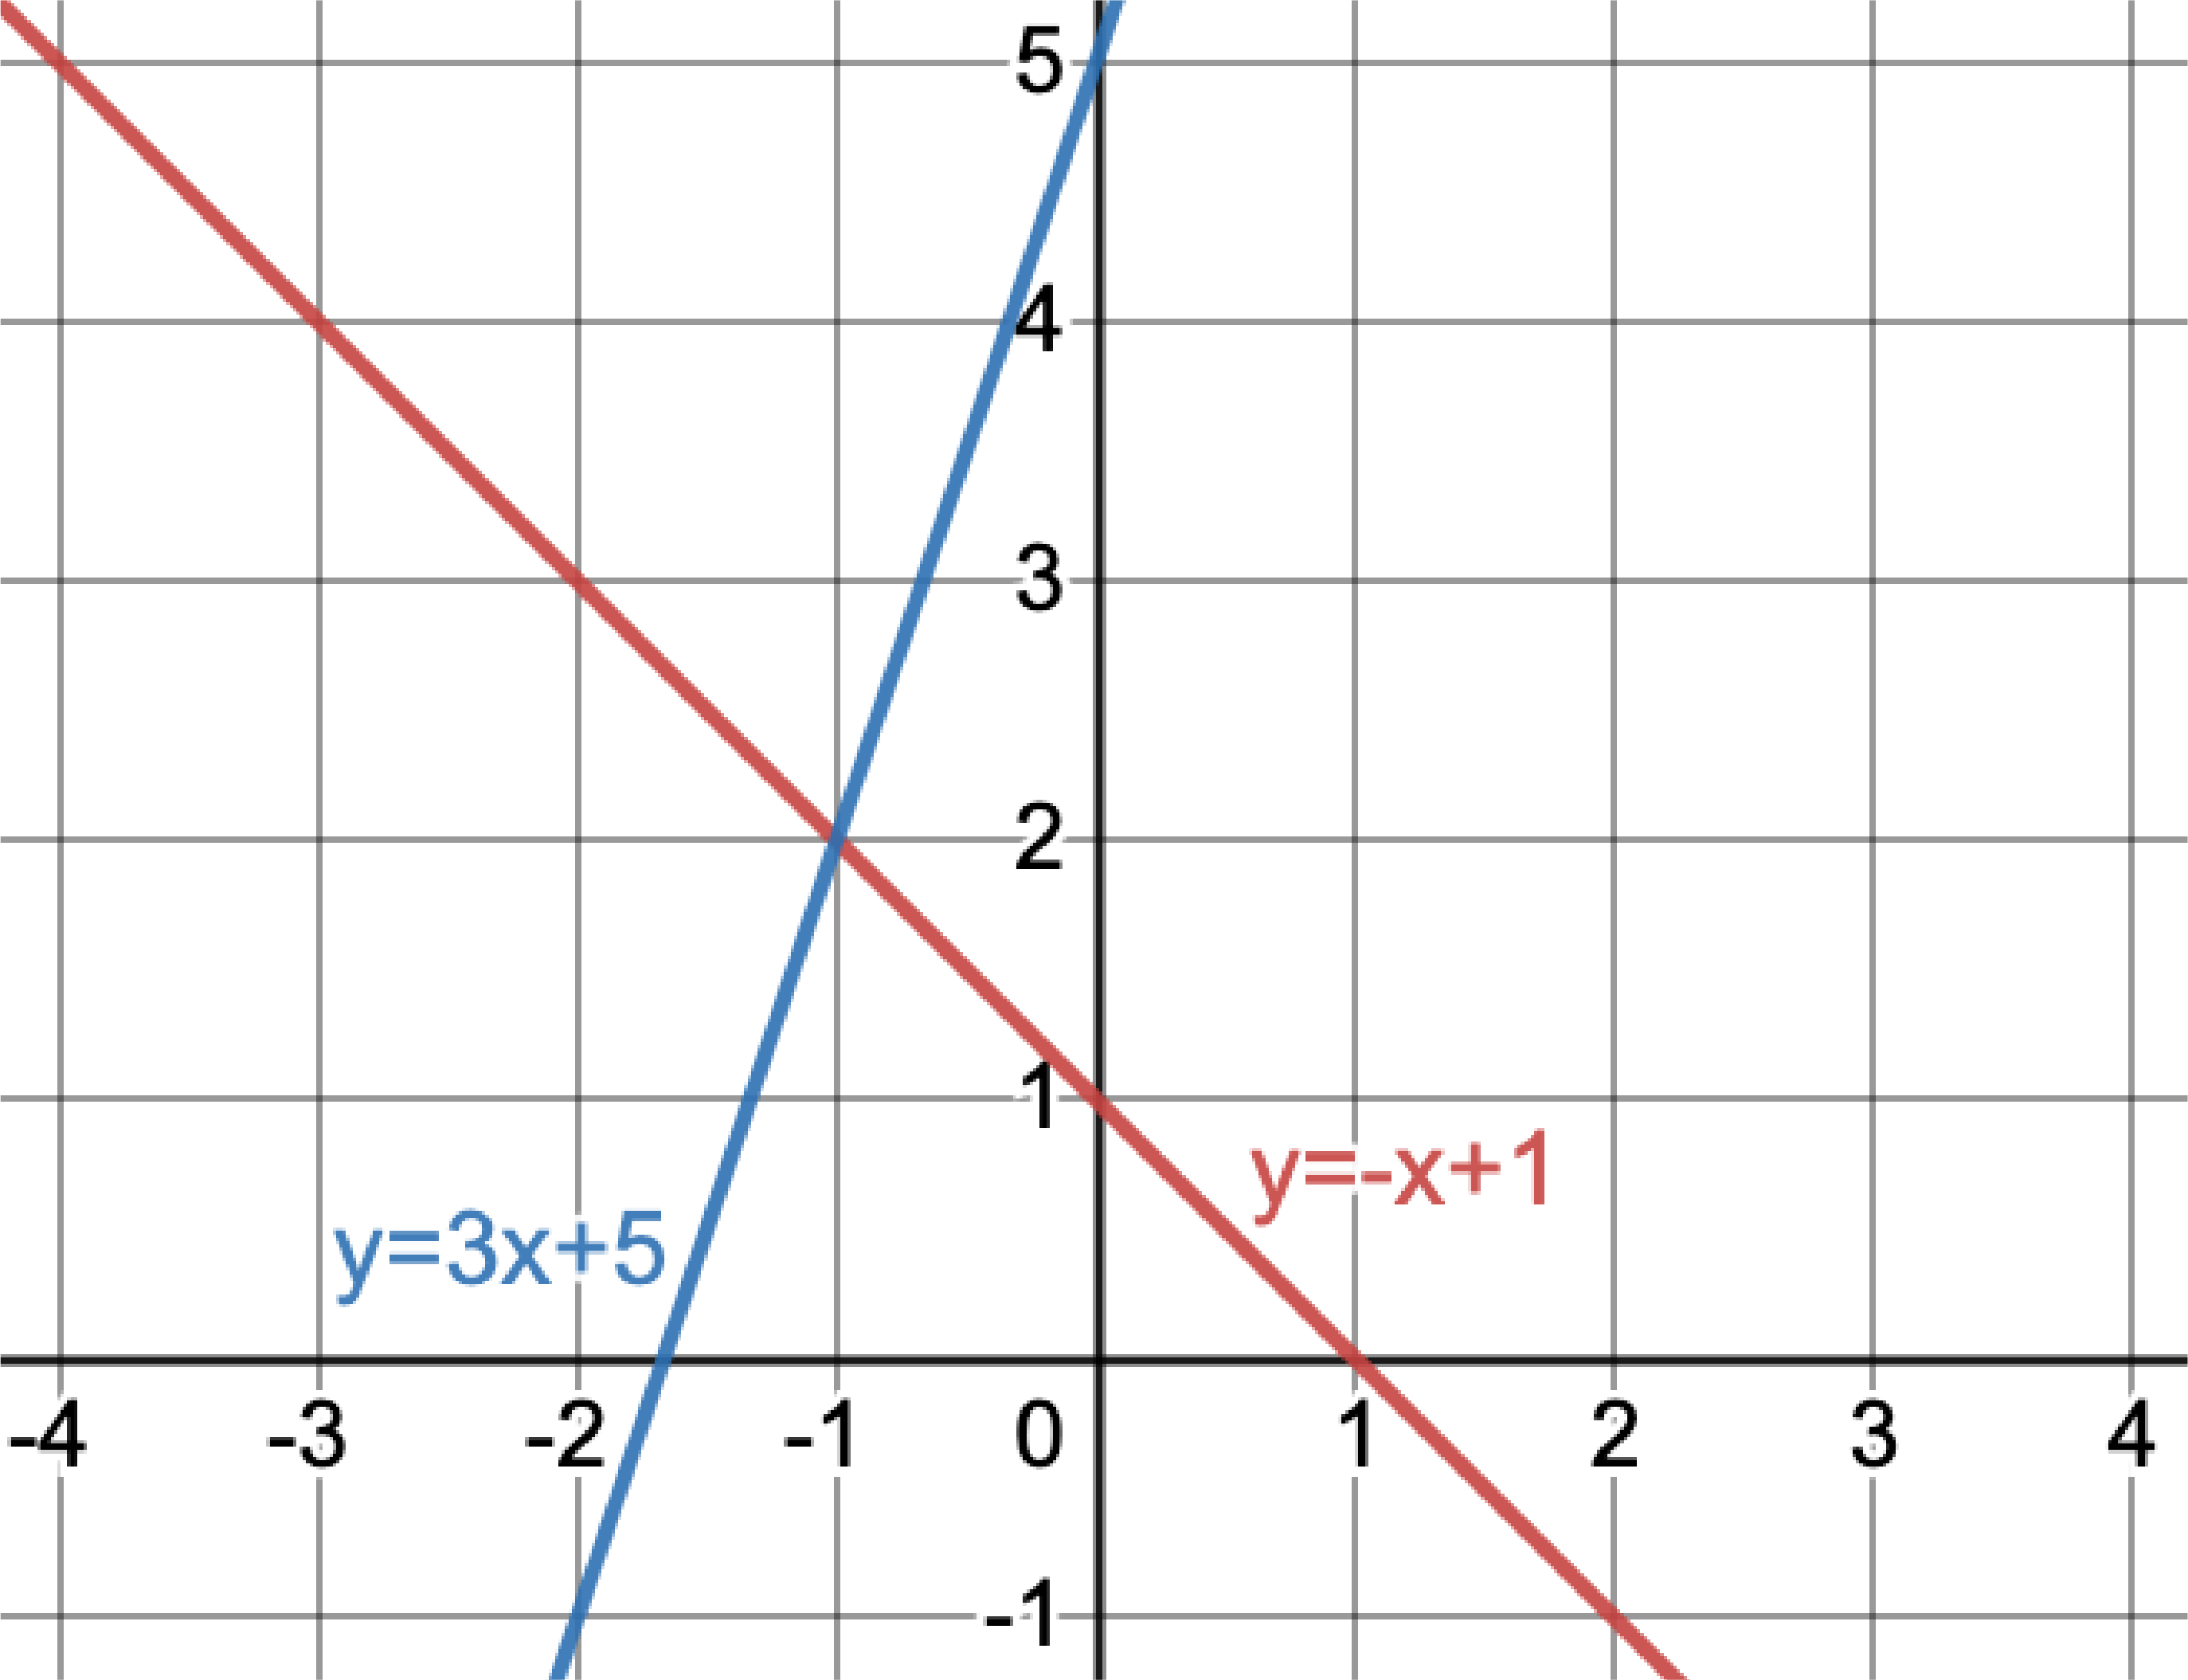 The two lines y equals negative x plus 1 and y equals 3x plus 5 are plotted together on the Cartesian plane. The lines intersect at the point (negative 1, 2) with one line going up to the right and the other going down to the right.